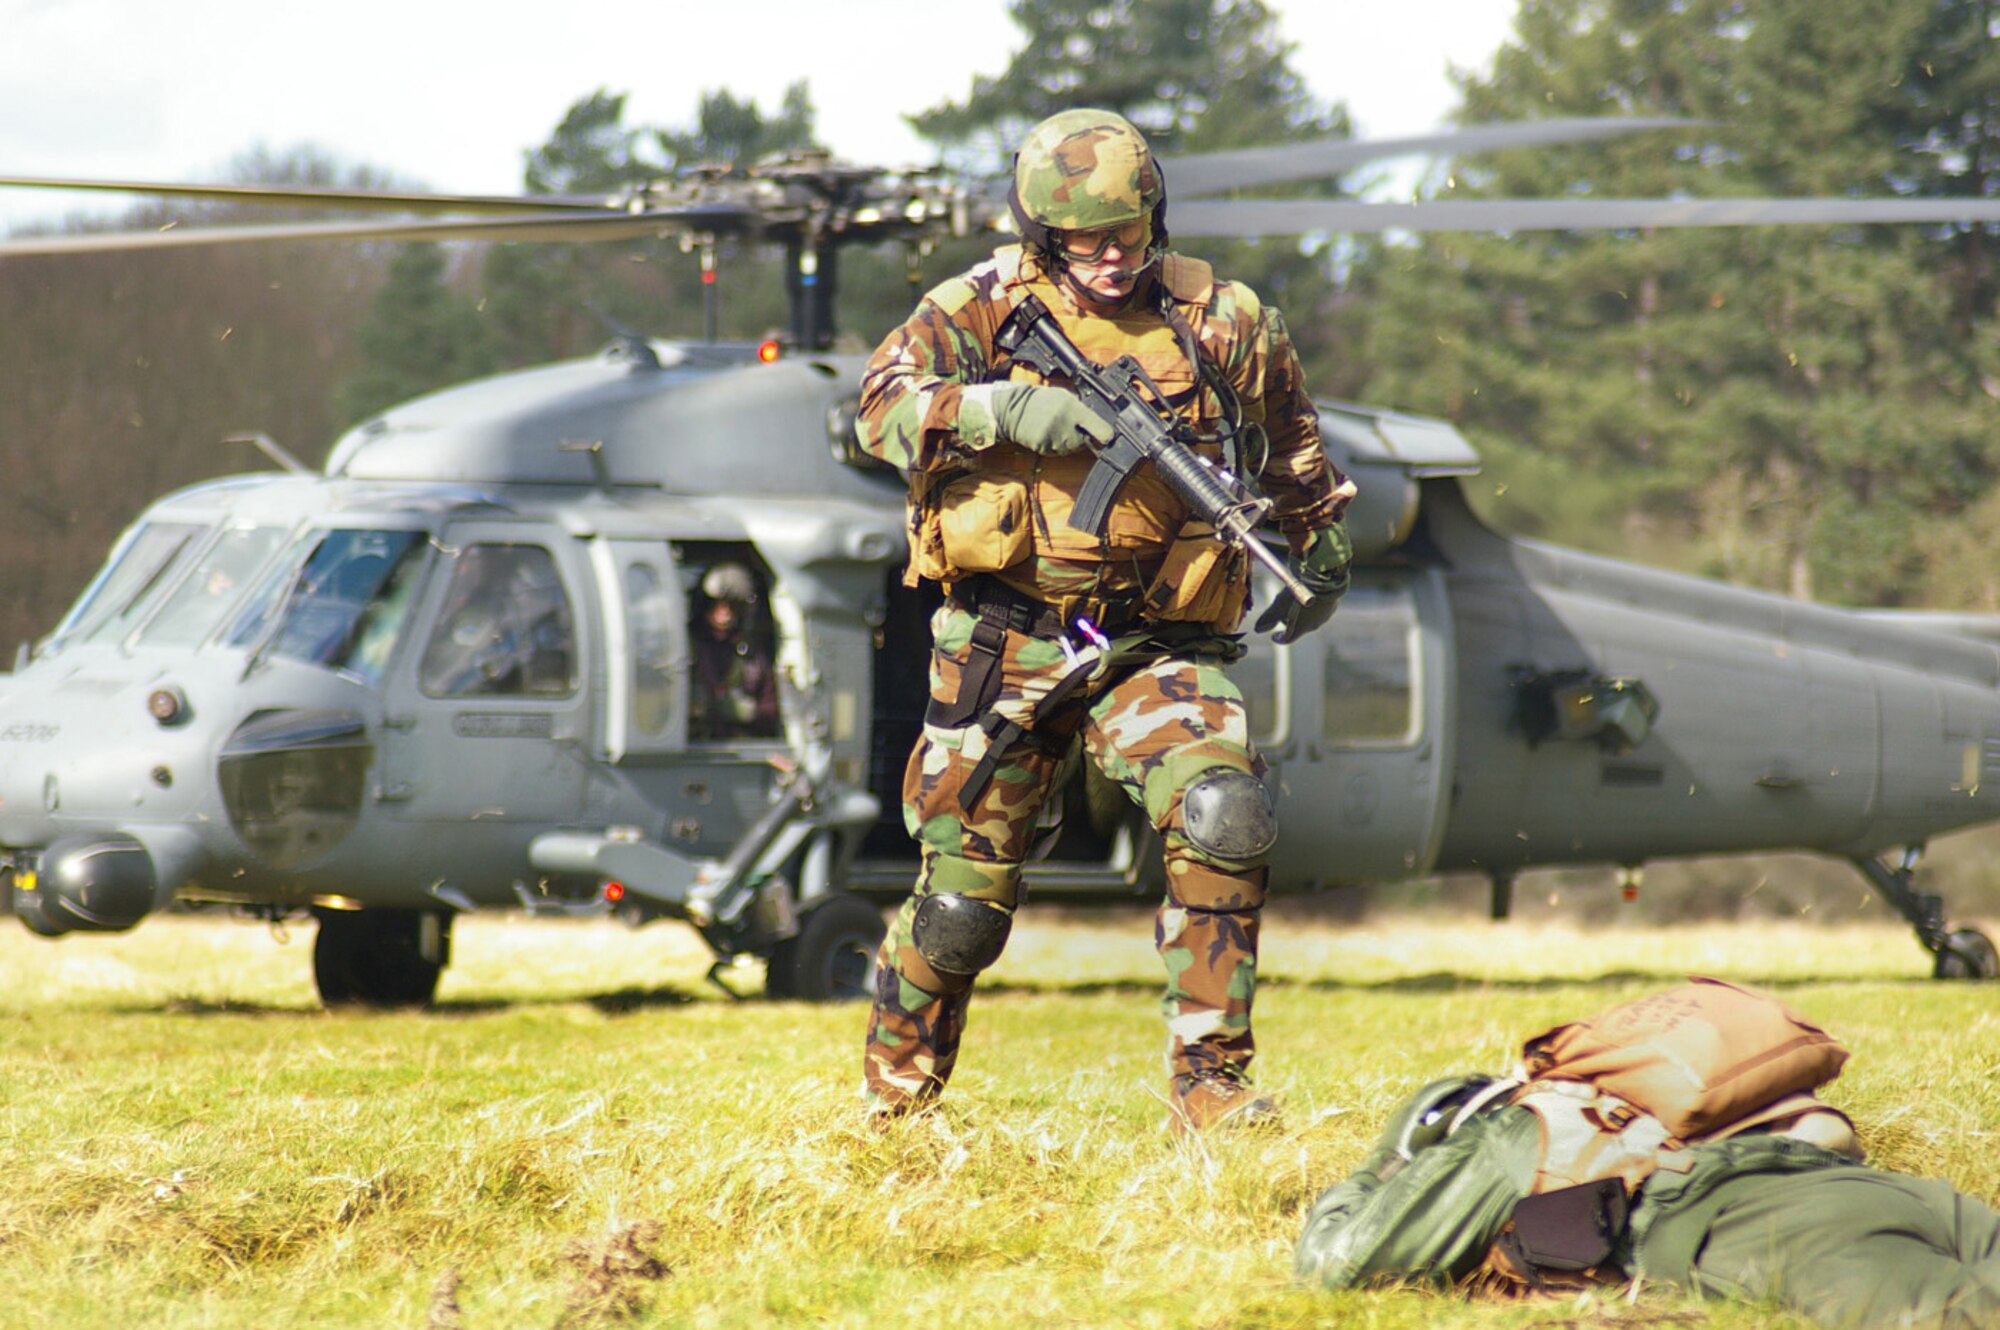 A member from the 56th Rescue Squadron, from RAF Lakenheath, stands over 1st lt. Jeramie Castellanos, 351st ARS, before taking him aboard a Pave Hawk helicopter during a mock rescue as part of a combat survival training event March 6 at Stanta training range near Thetford, England. (U.S. Air Force photo by Karen Abeyasekere)